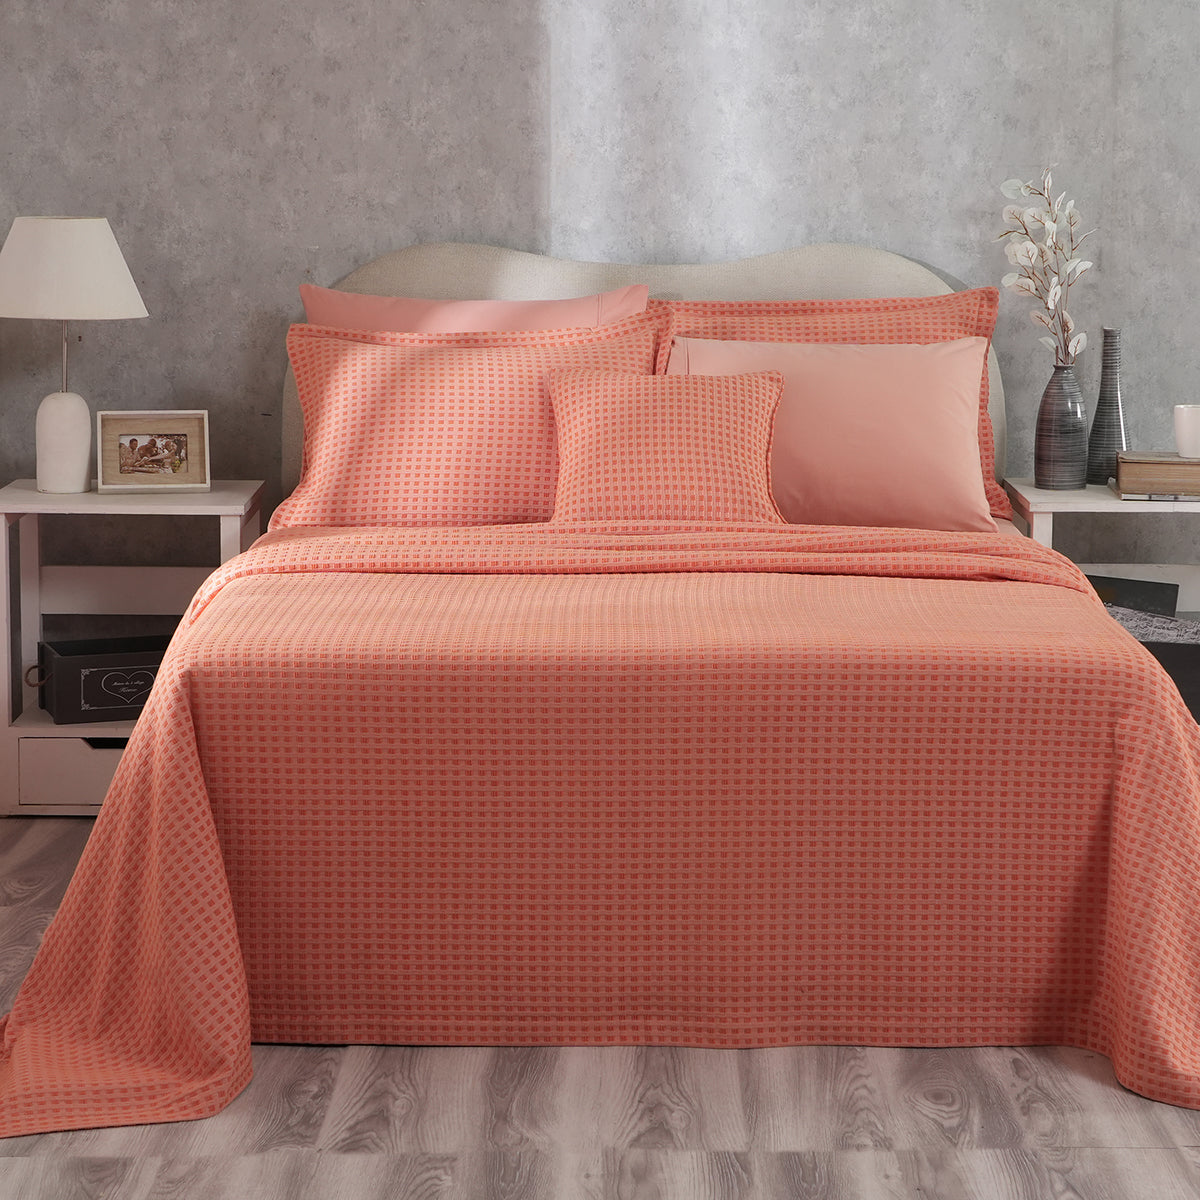 Enchanted Harmony Parable Intertwist Bed Cover